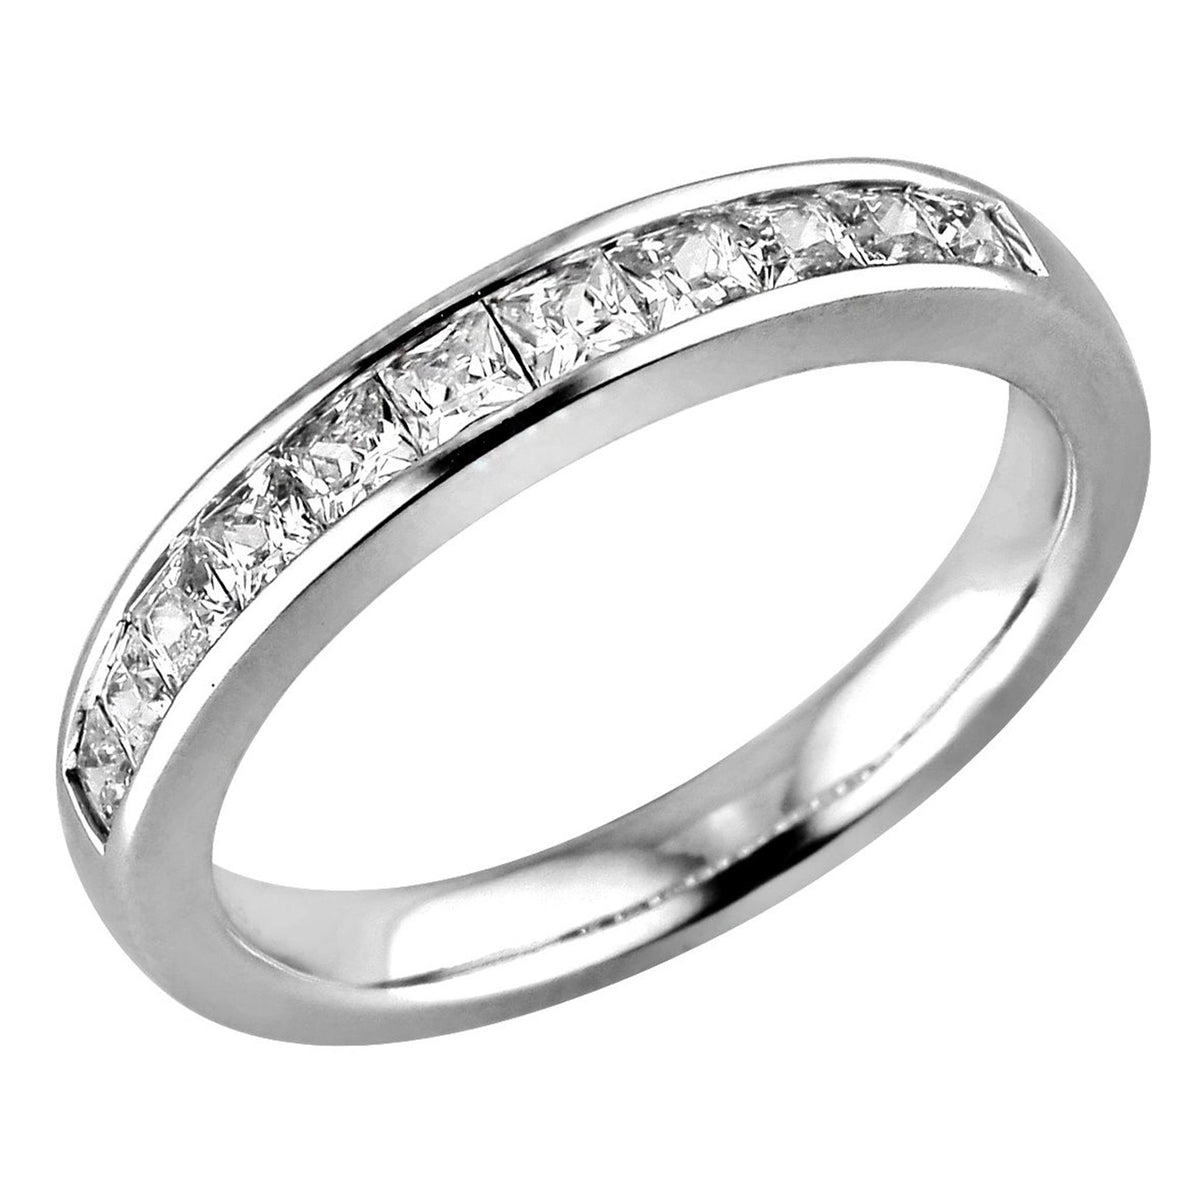 18Kt White Gold Channel Set Wedding Ring With 1.14cttw Natural Diamonds